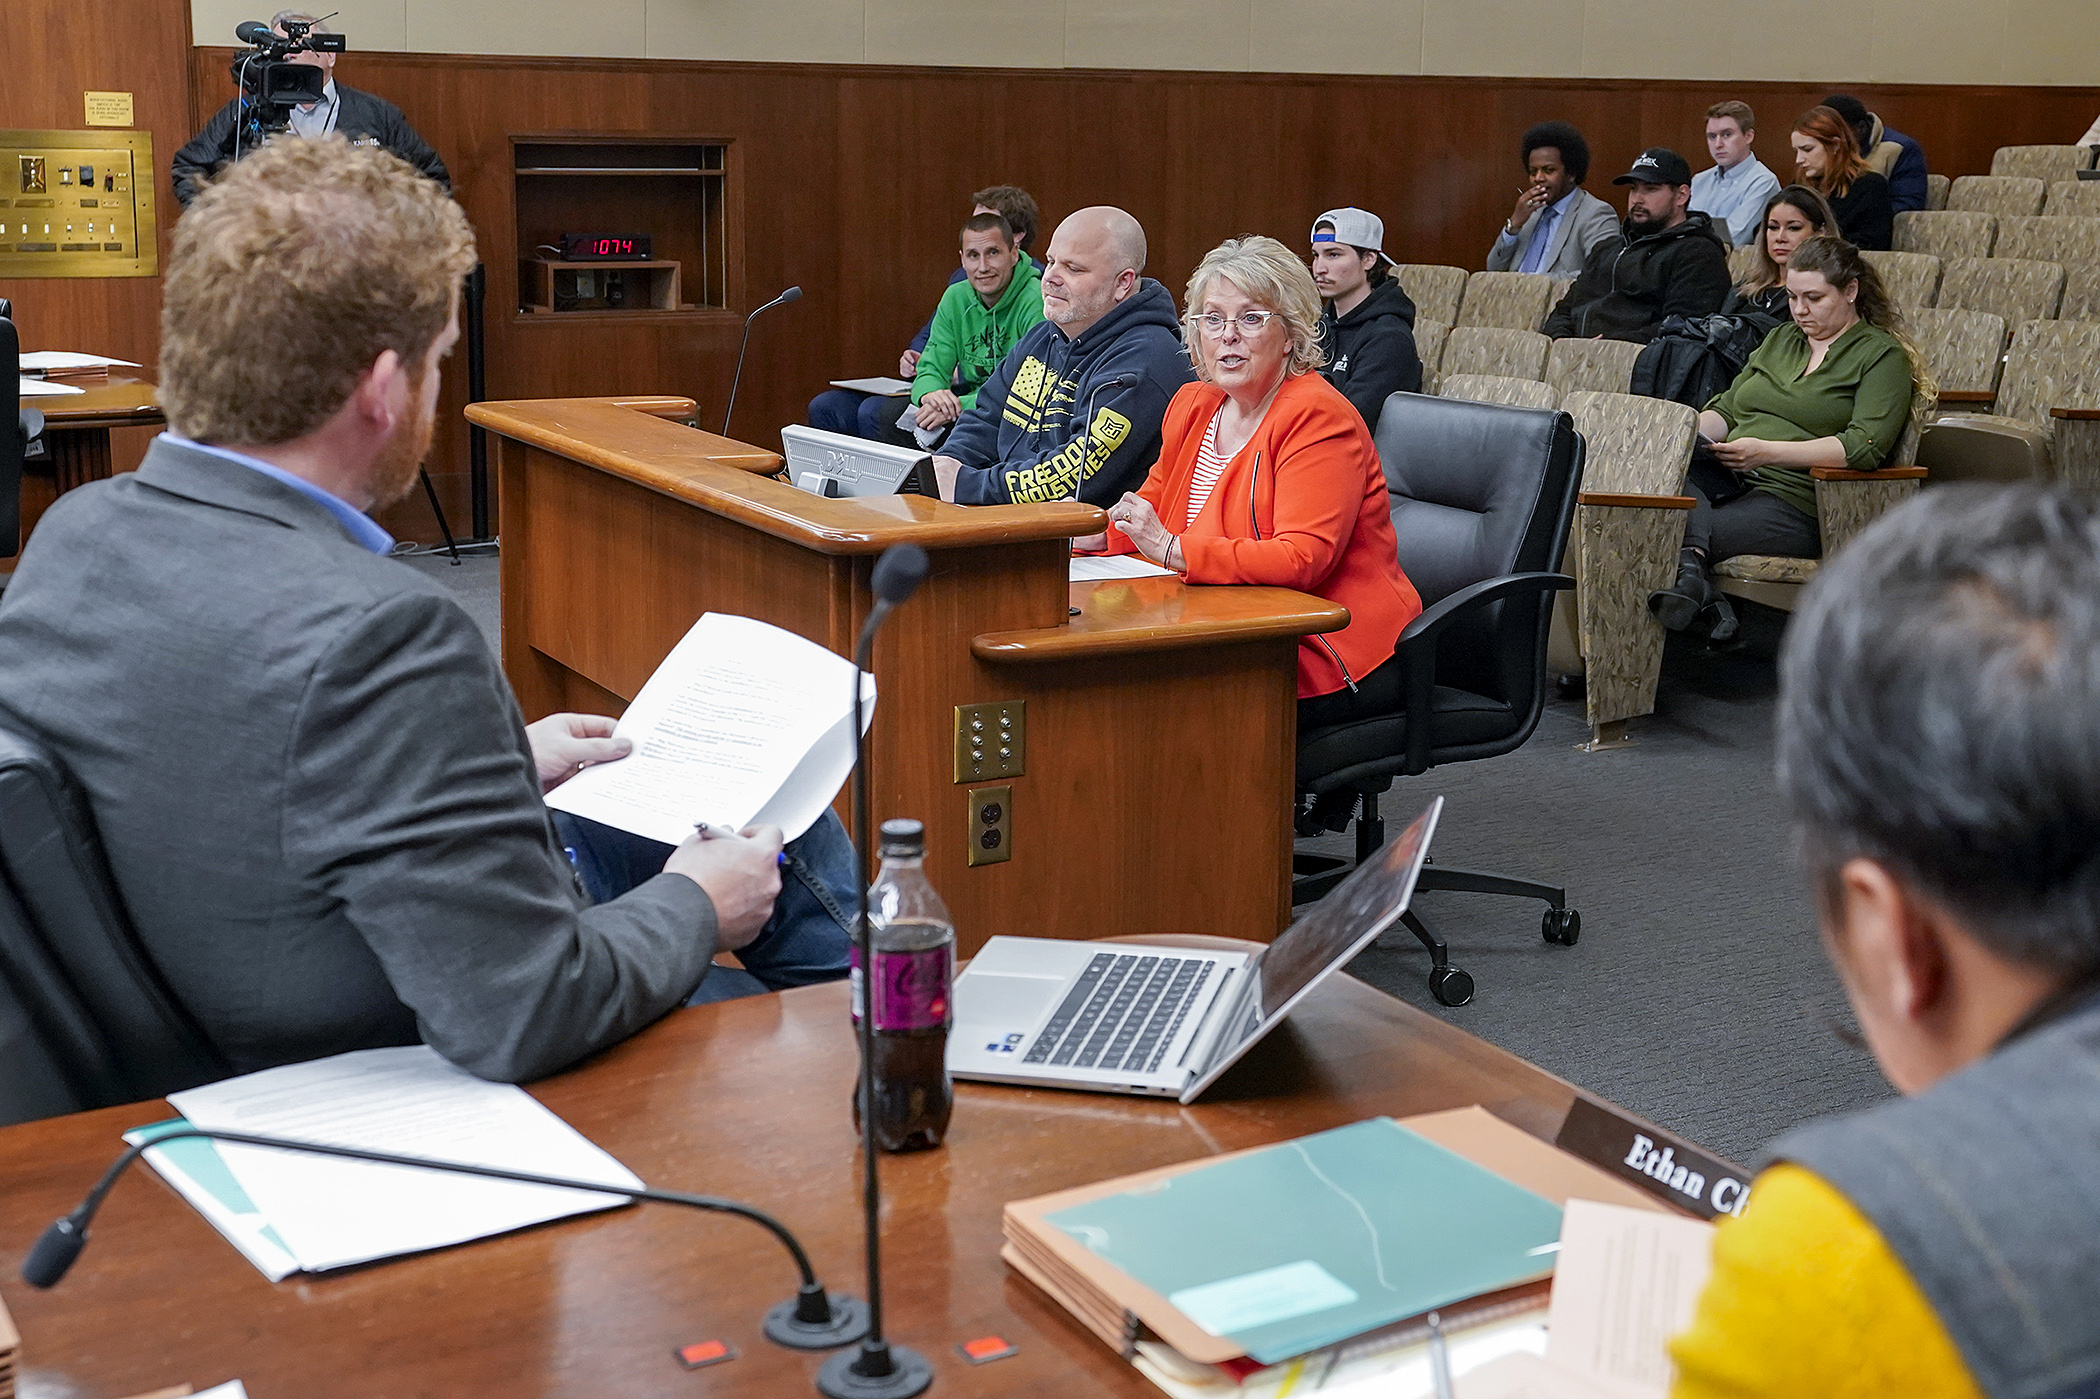 Charlene Briner, interim director of the Office of Cannabis Management, testifies before the House Commerce Finance and Policy Committee March 27 regarding HF4757, the cannabis policy bill. Rep. Zack Stephenson, foreground, is the sponsor. (Photo by Michele Jokinen)